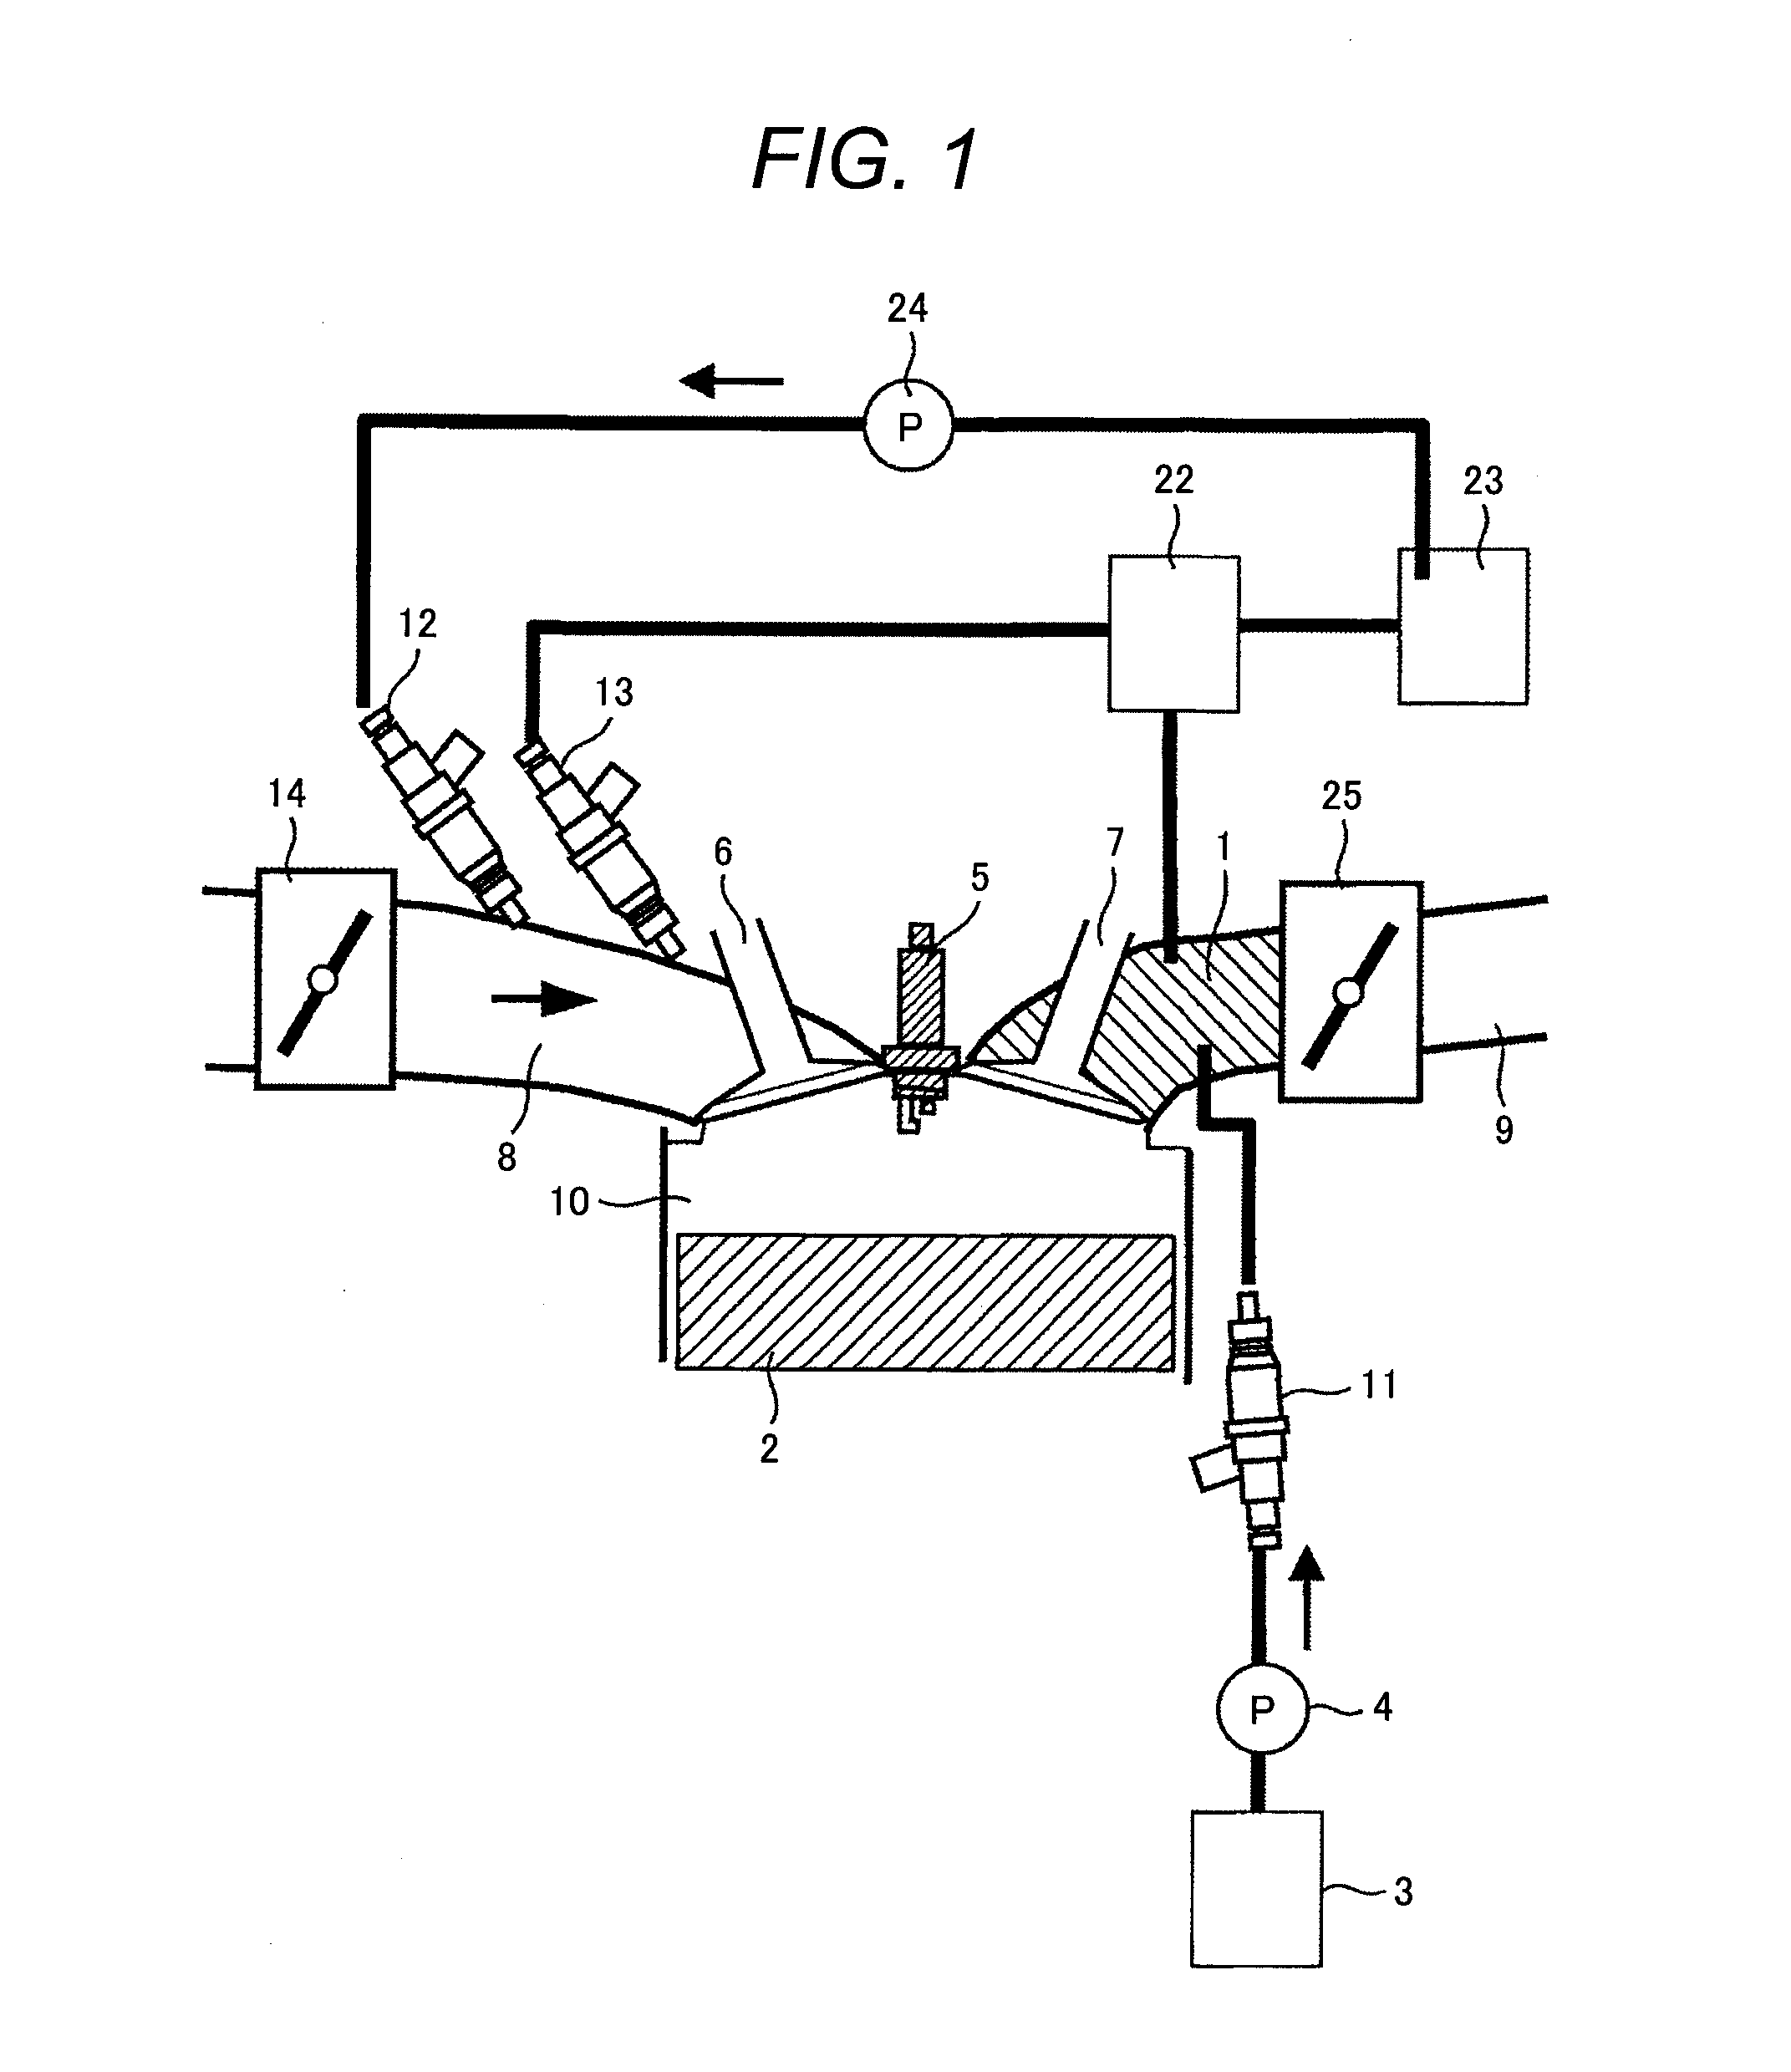 Engine System with Reformer